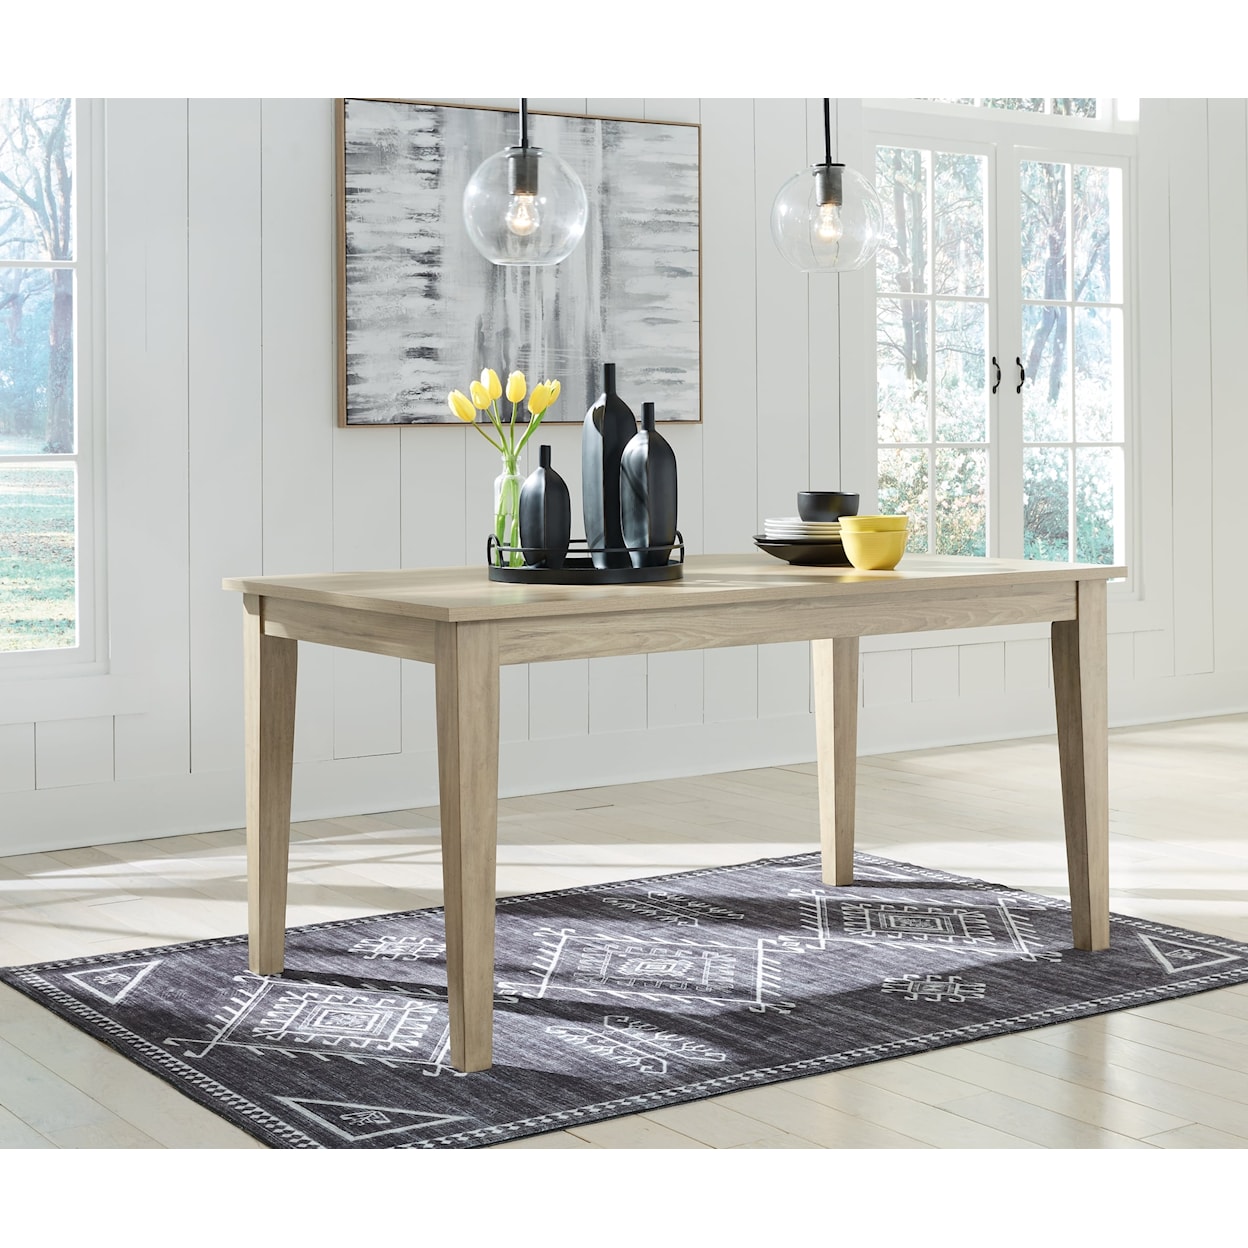 Signature Design by Ashley Furniture Gleanville 5-Piece Dining Set